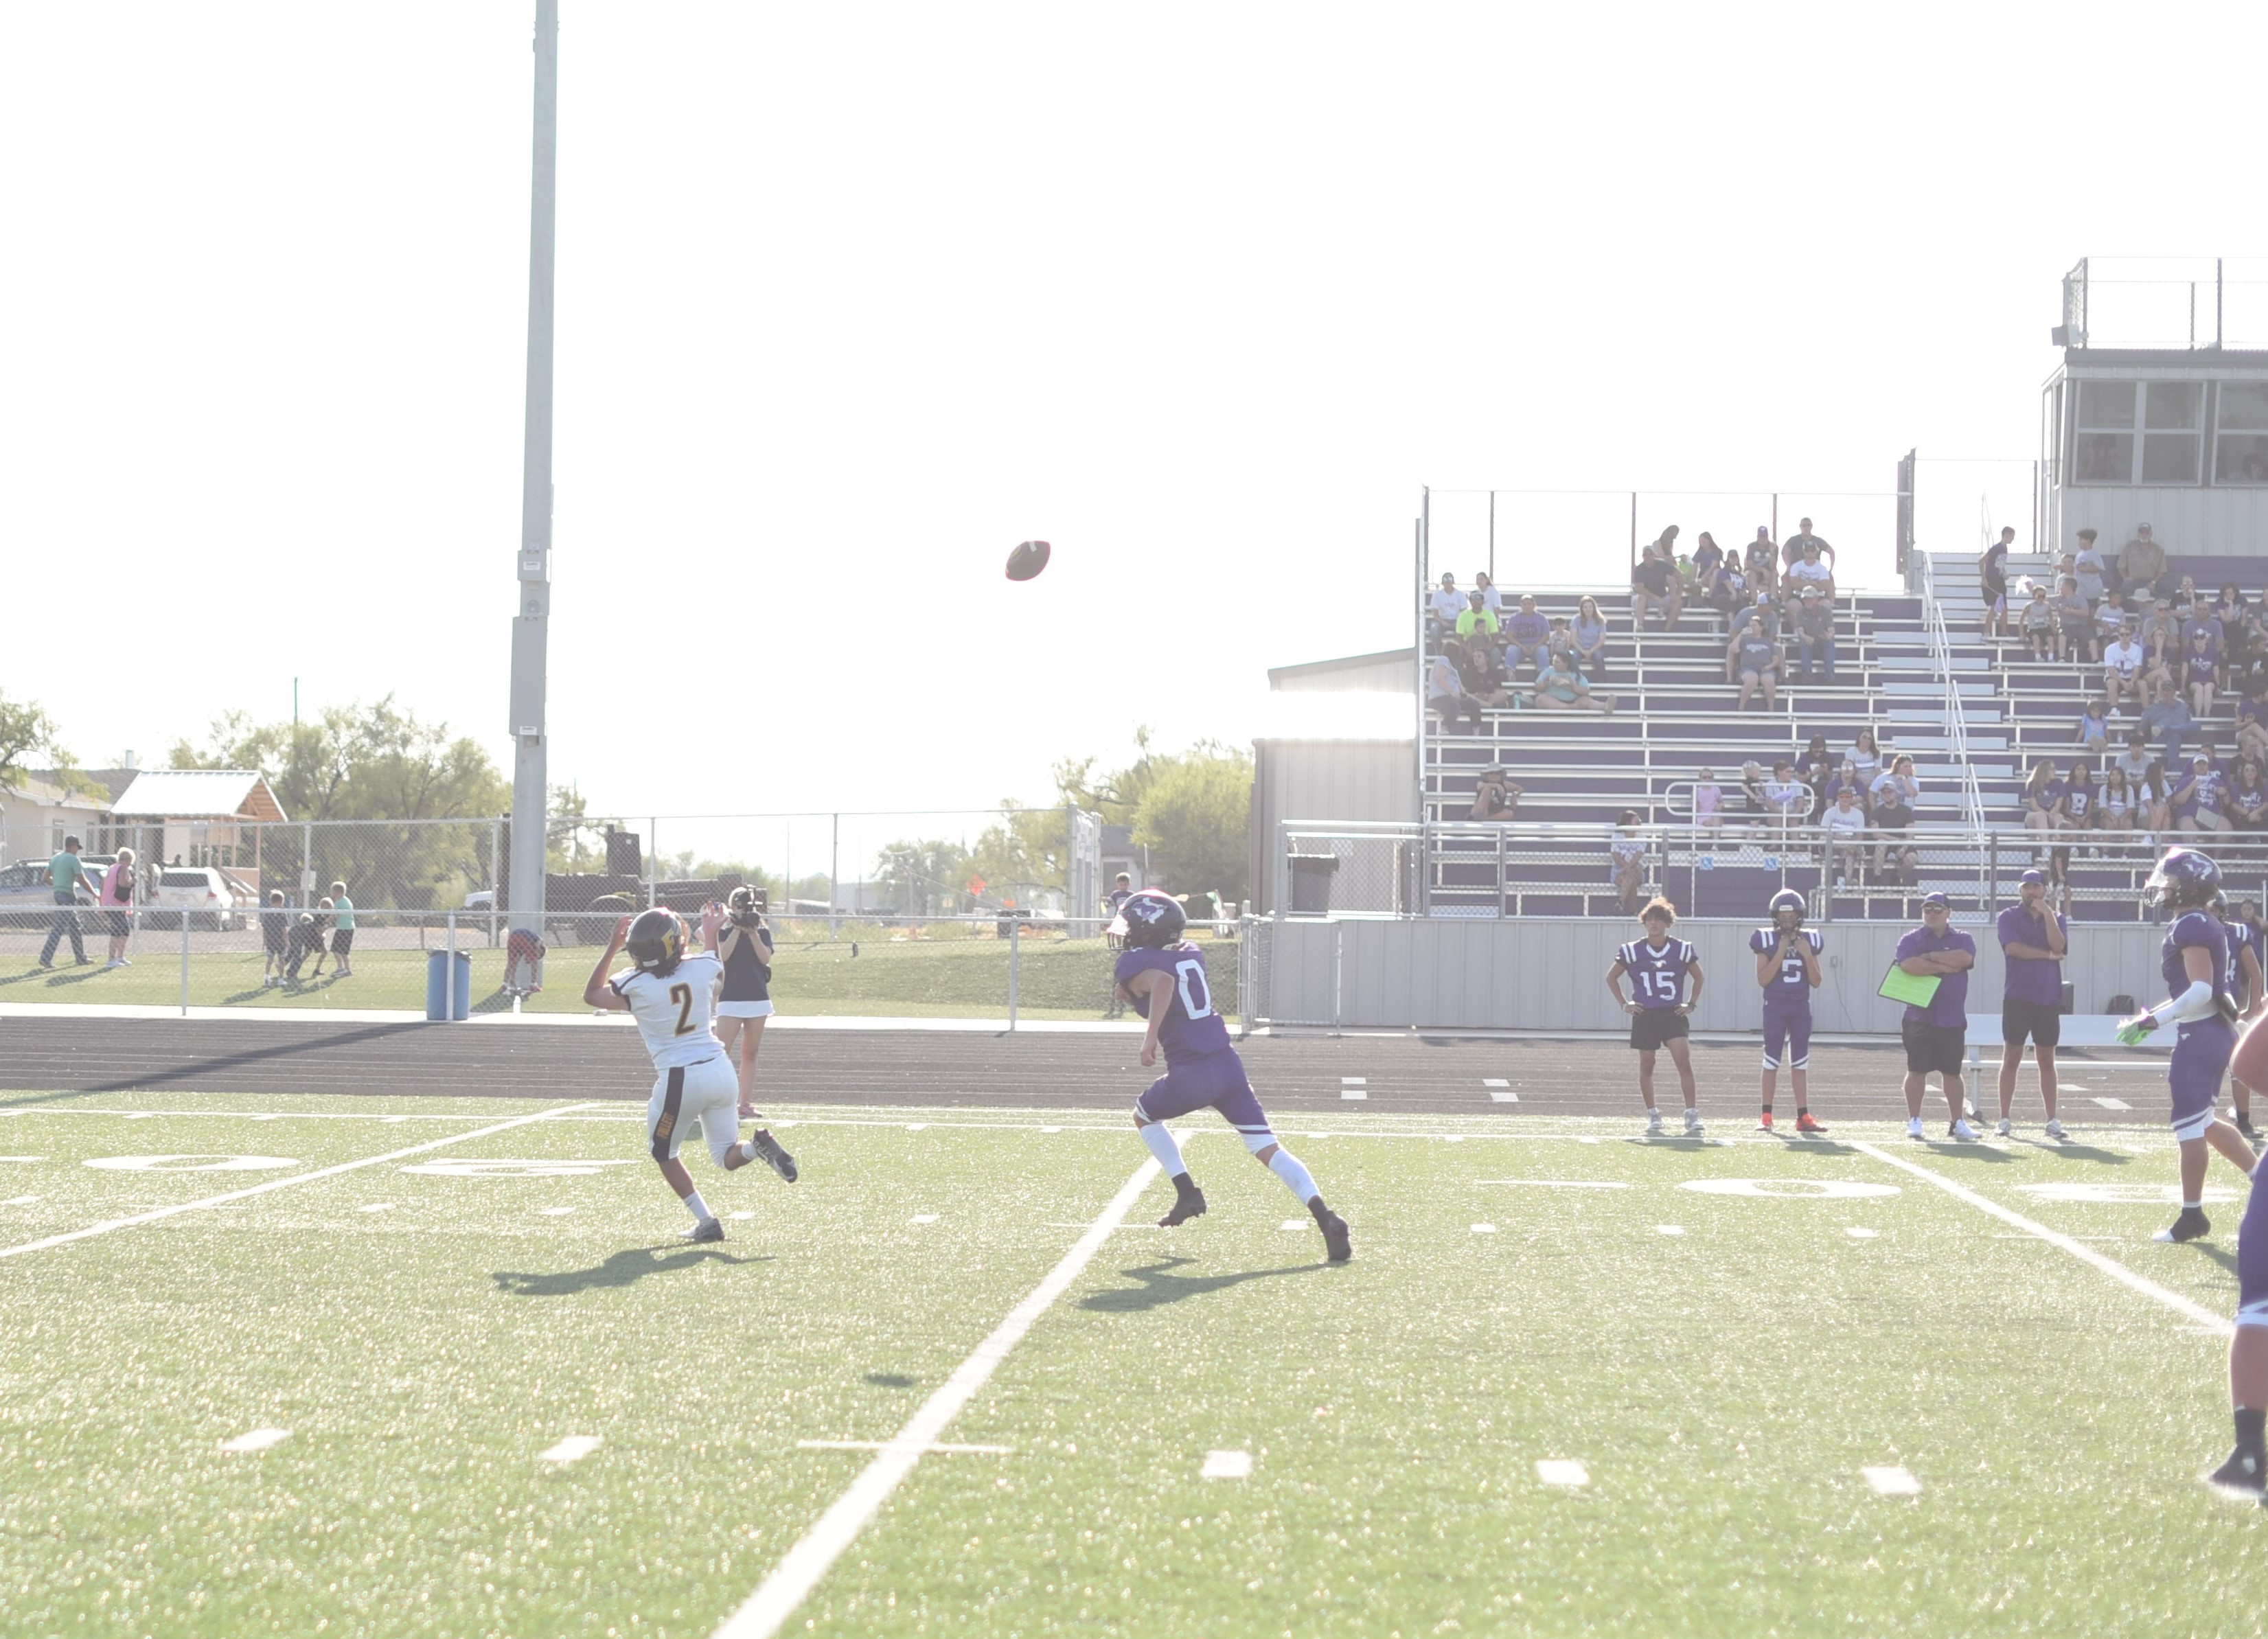 B. Aguilar with a catch.